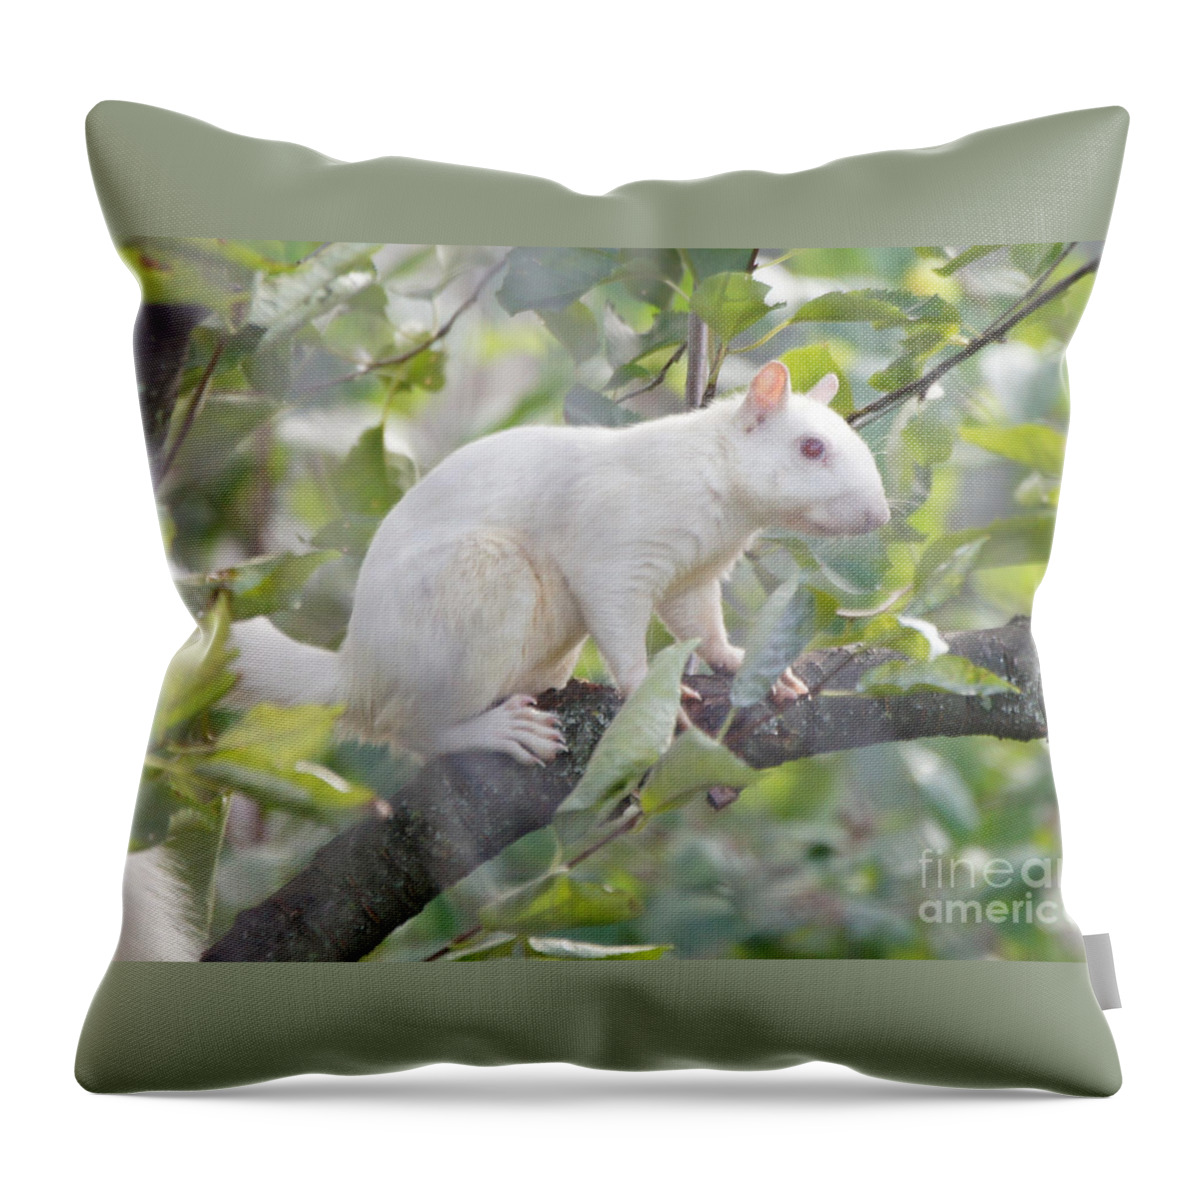 Squirrel Throw Pillow featuring the photograph White Squirrel #1 by Robert E Alter Reflections of Infinity